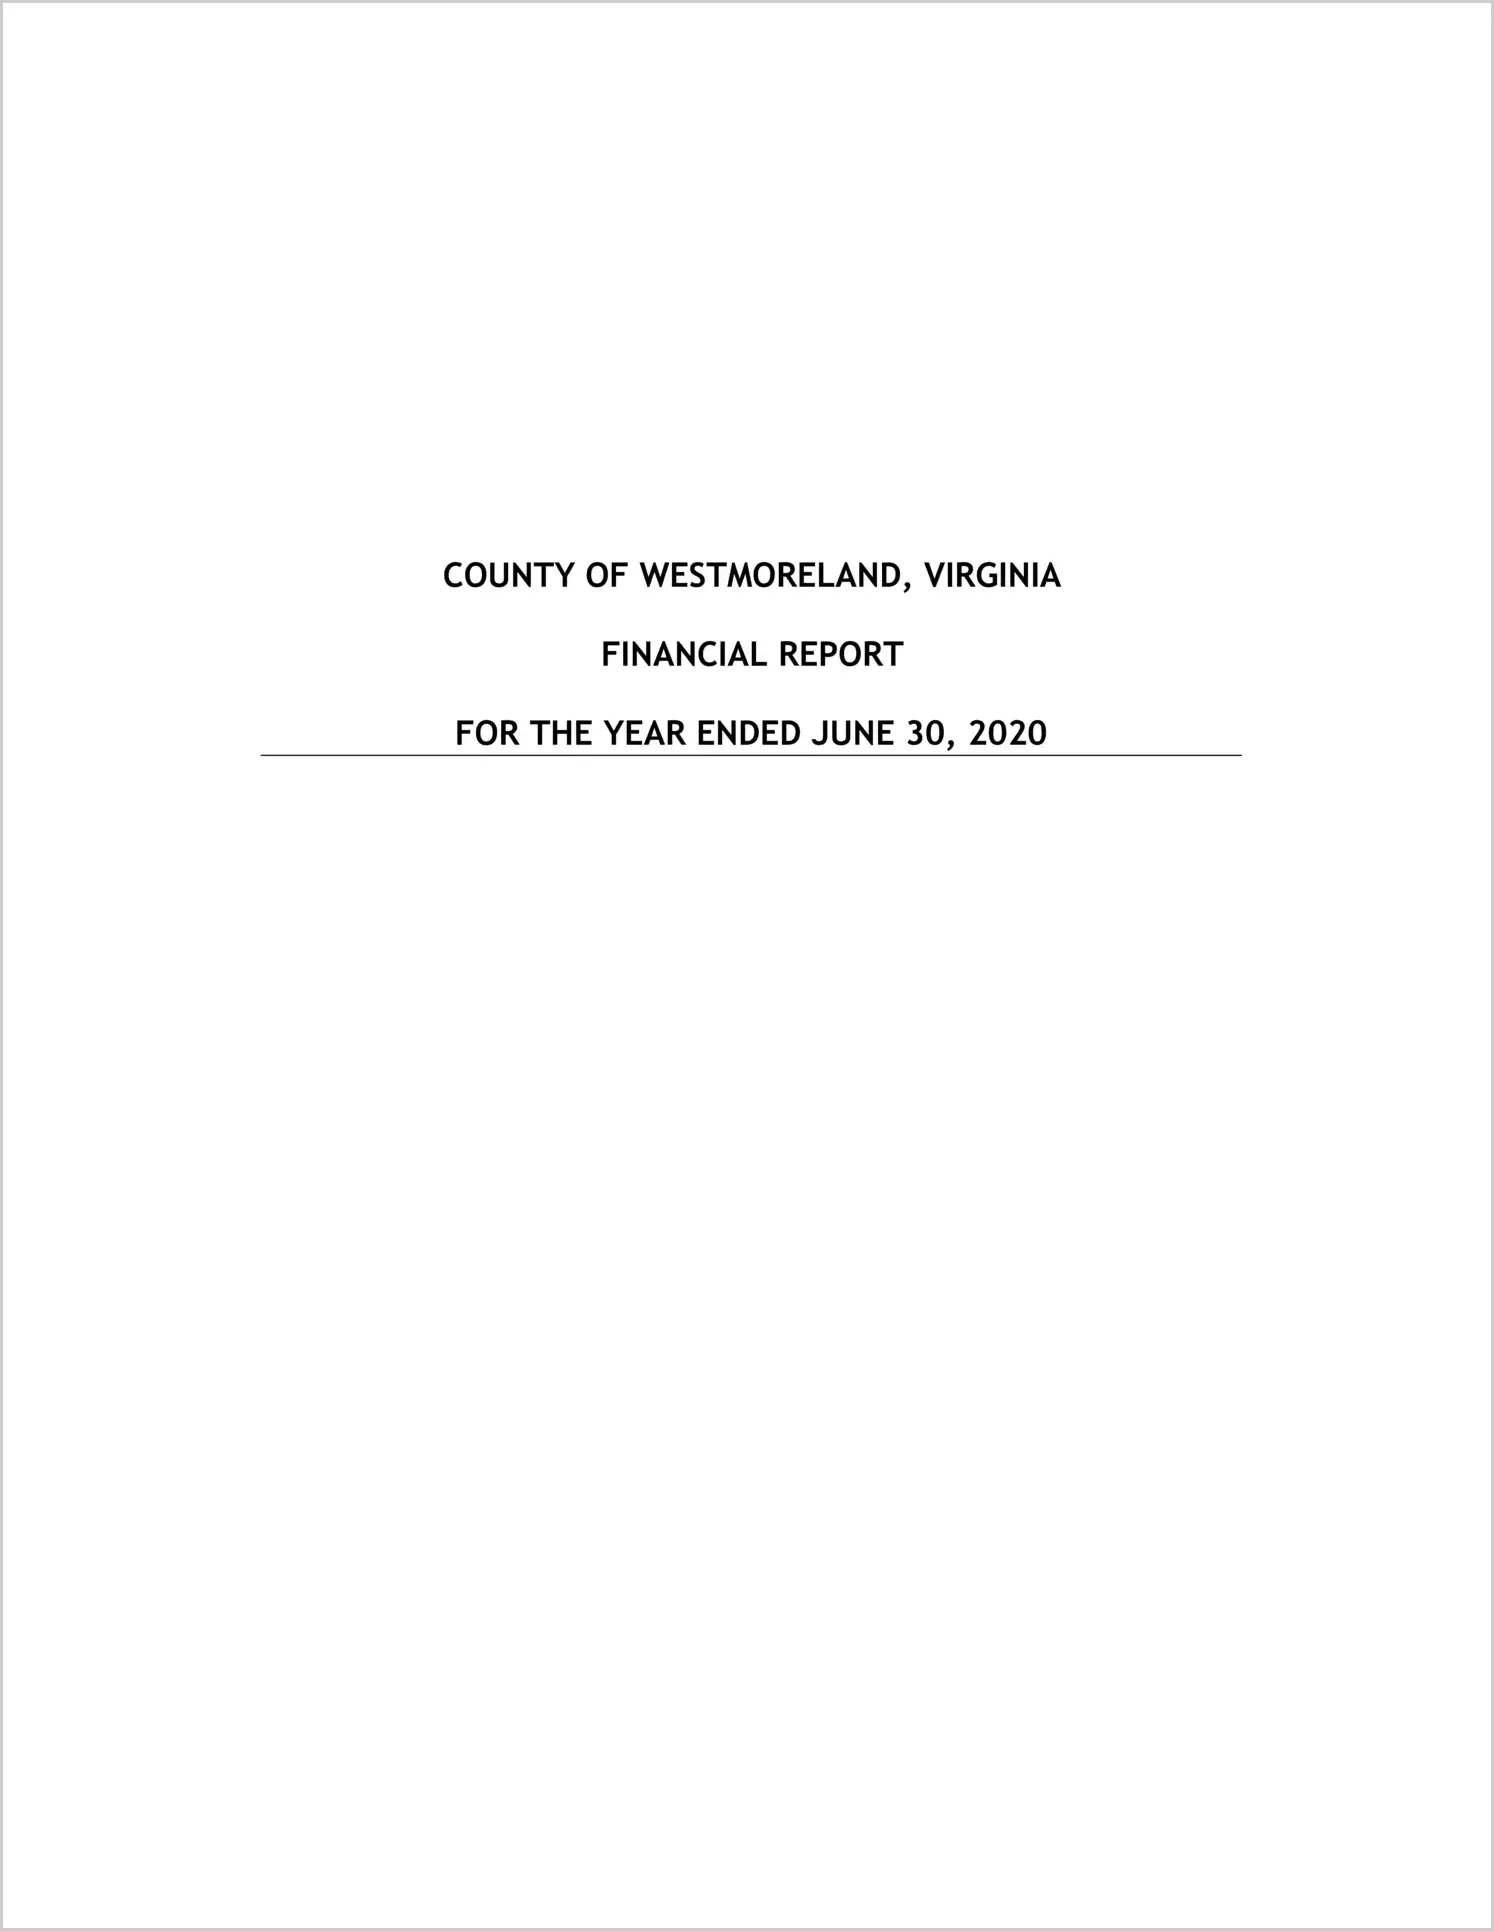 2020 Annual Financial Report for County of Westmoreland